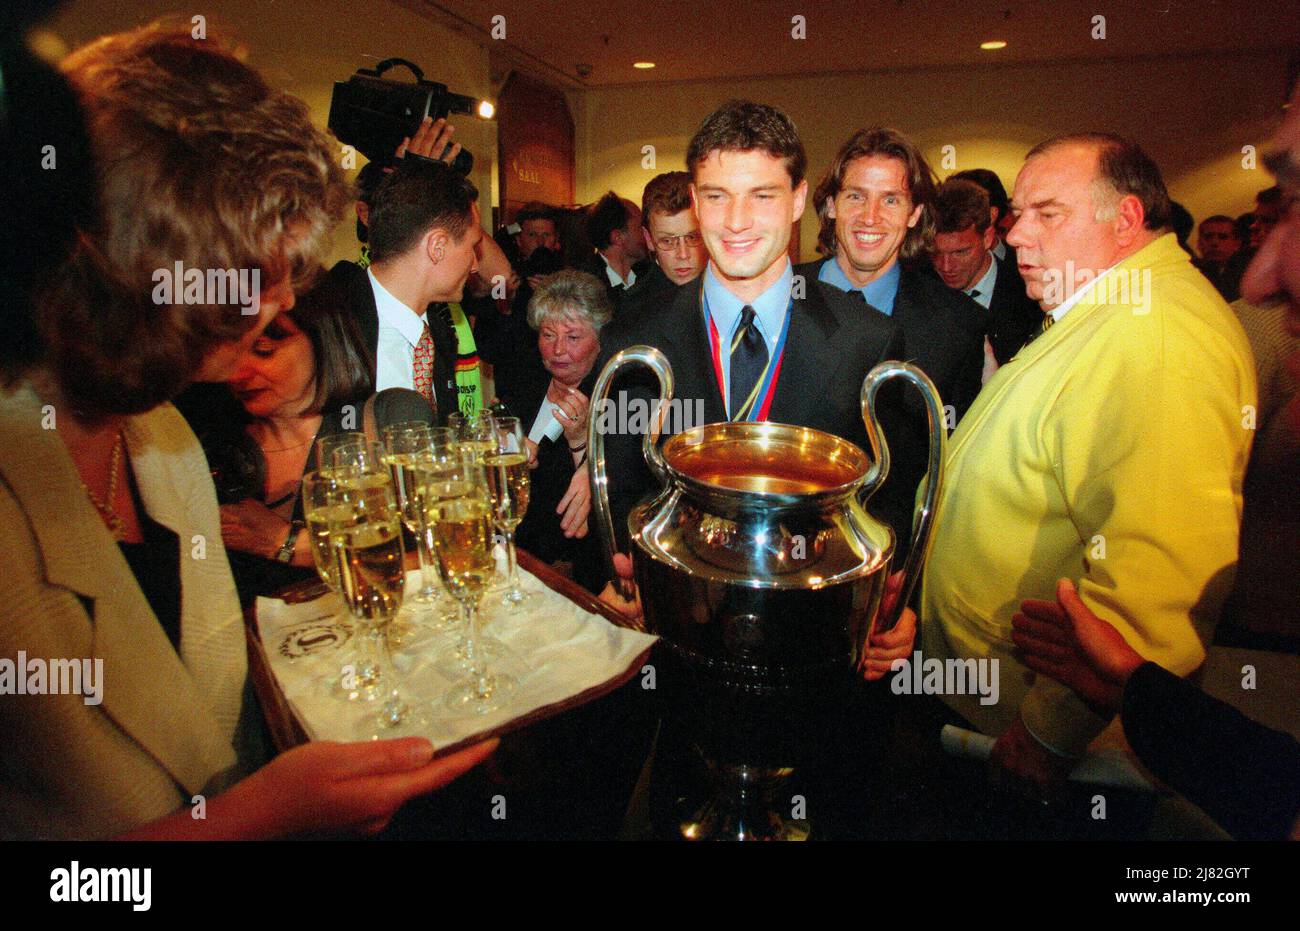 Little Boy, Deutschland. 15th May, 2013. firo Fuvuball, Football, 05/28/1997 Champions League season 1997 final BVB Borussia Dortmund - Juventus Turin 3:1 Michael Zorc entering the celebration after the game with Champions League Cup Trophv§e Credit: dpa/Alamy Live News Stock Photo